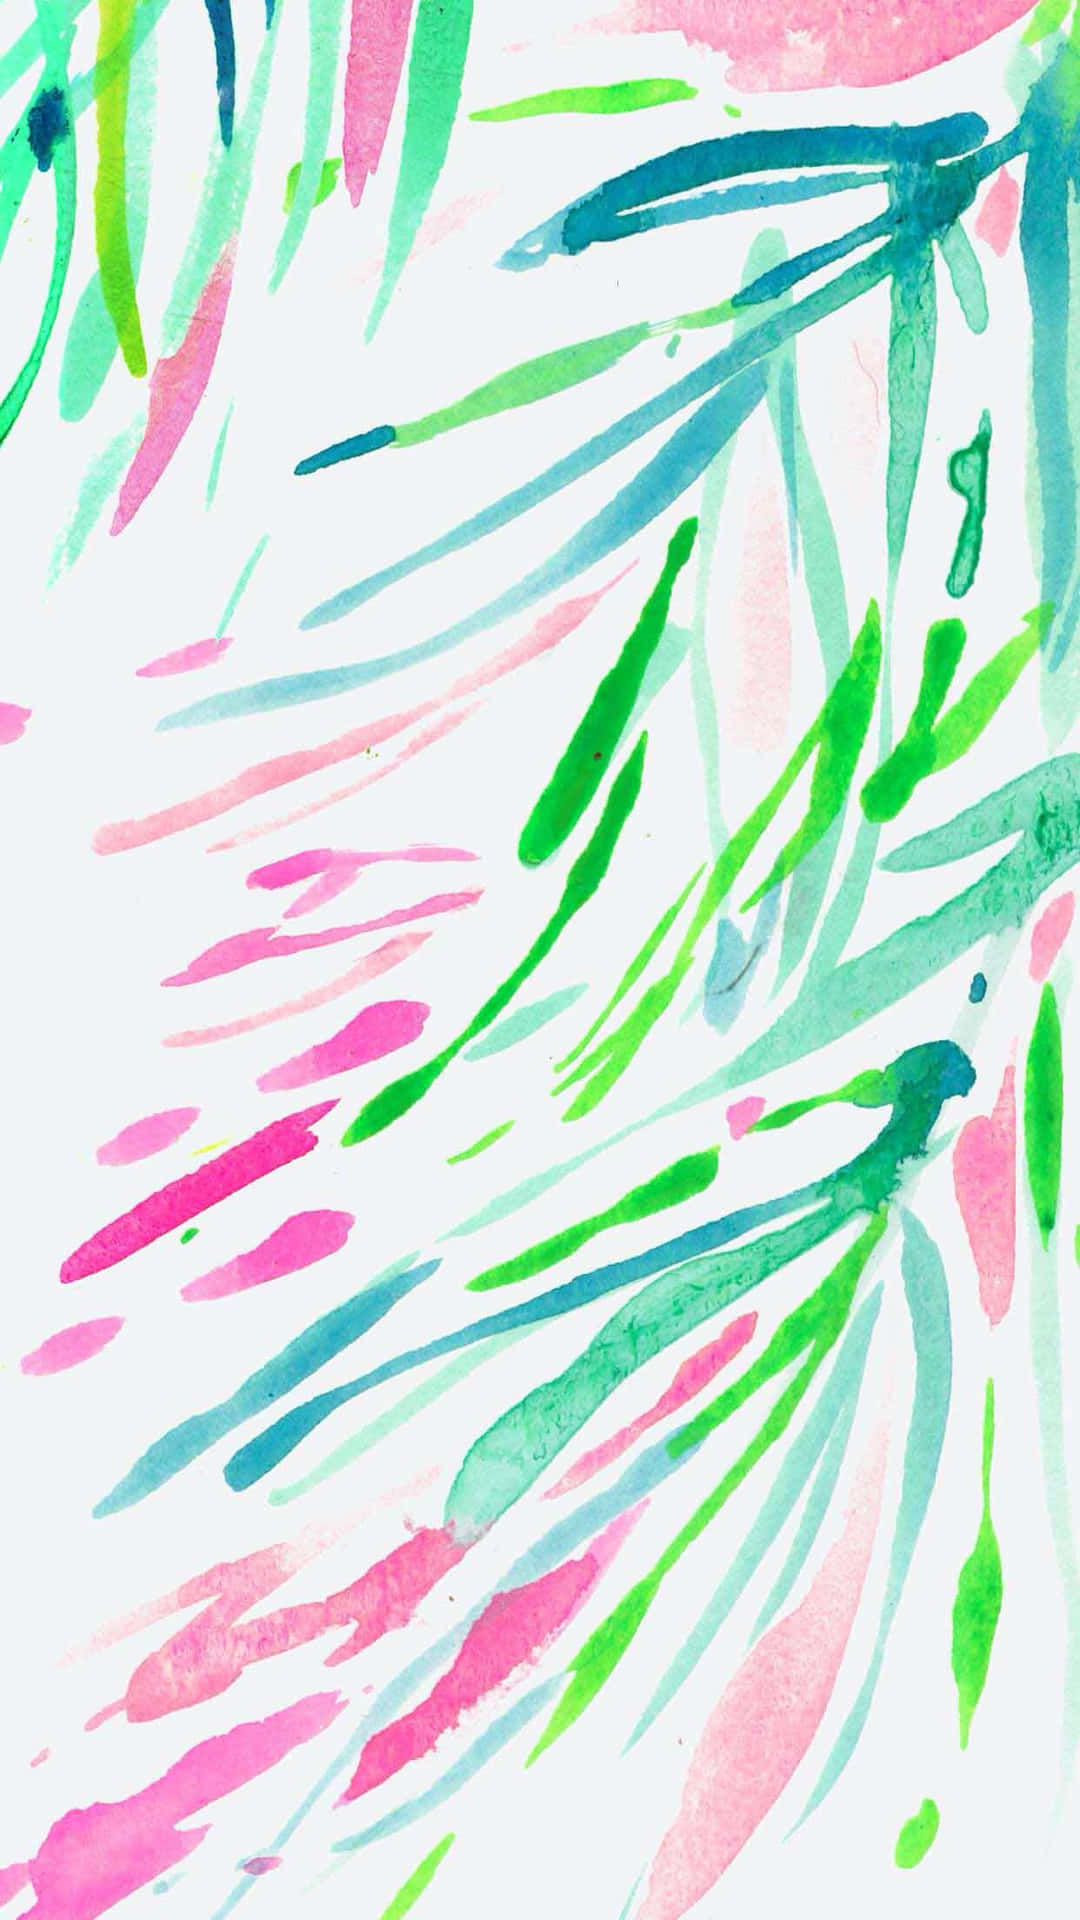 Show Off Your Style with this Lilly Pulitzer iPhone Wallpaper